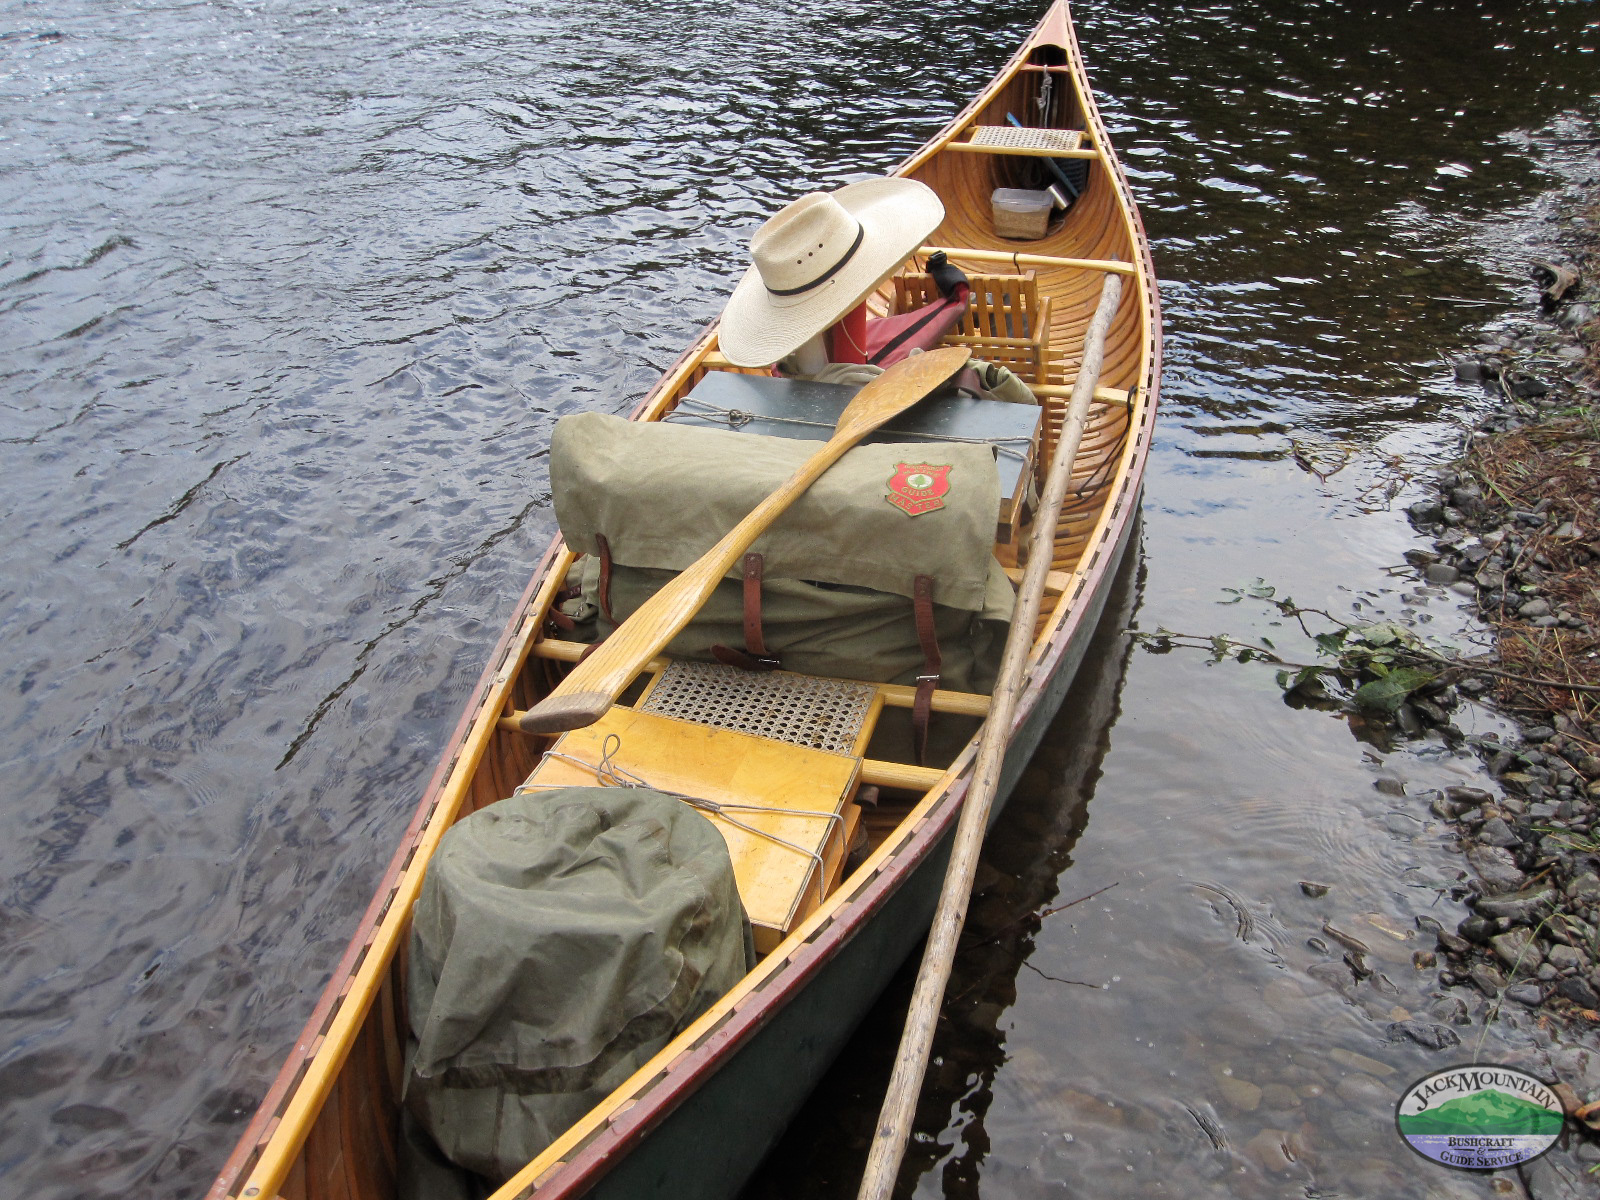 Big Black River Trip, Maine, Article From The Boston Globe in 2005